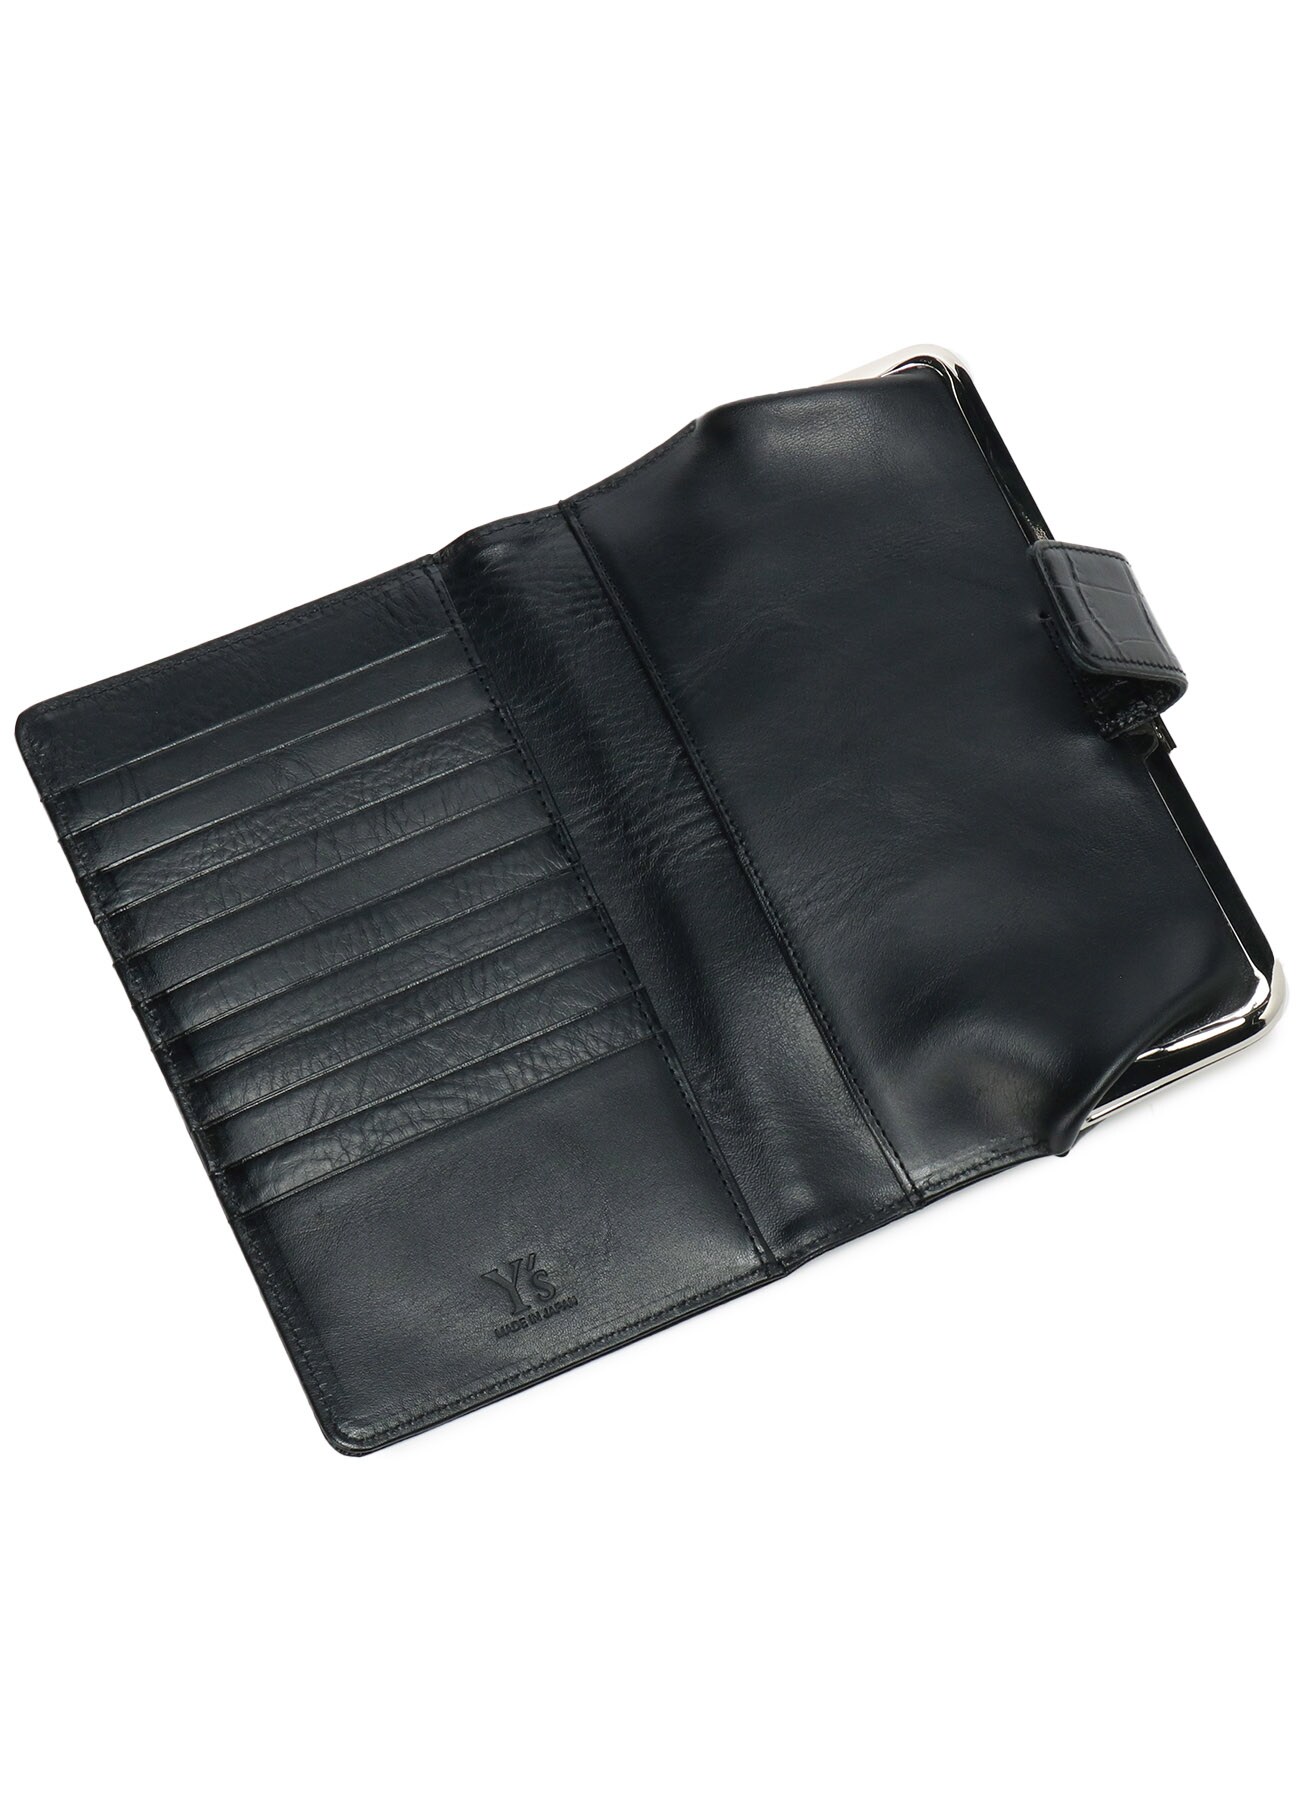 EMBOSSED CROCODILE LEATHER LONG CLASP WALLET